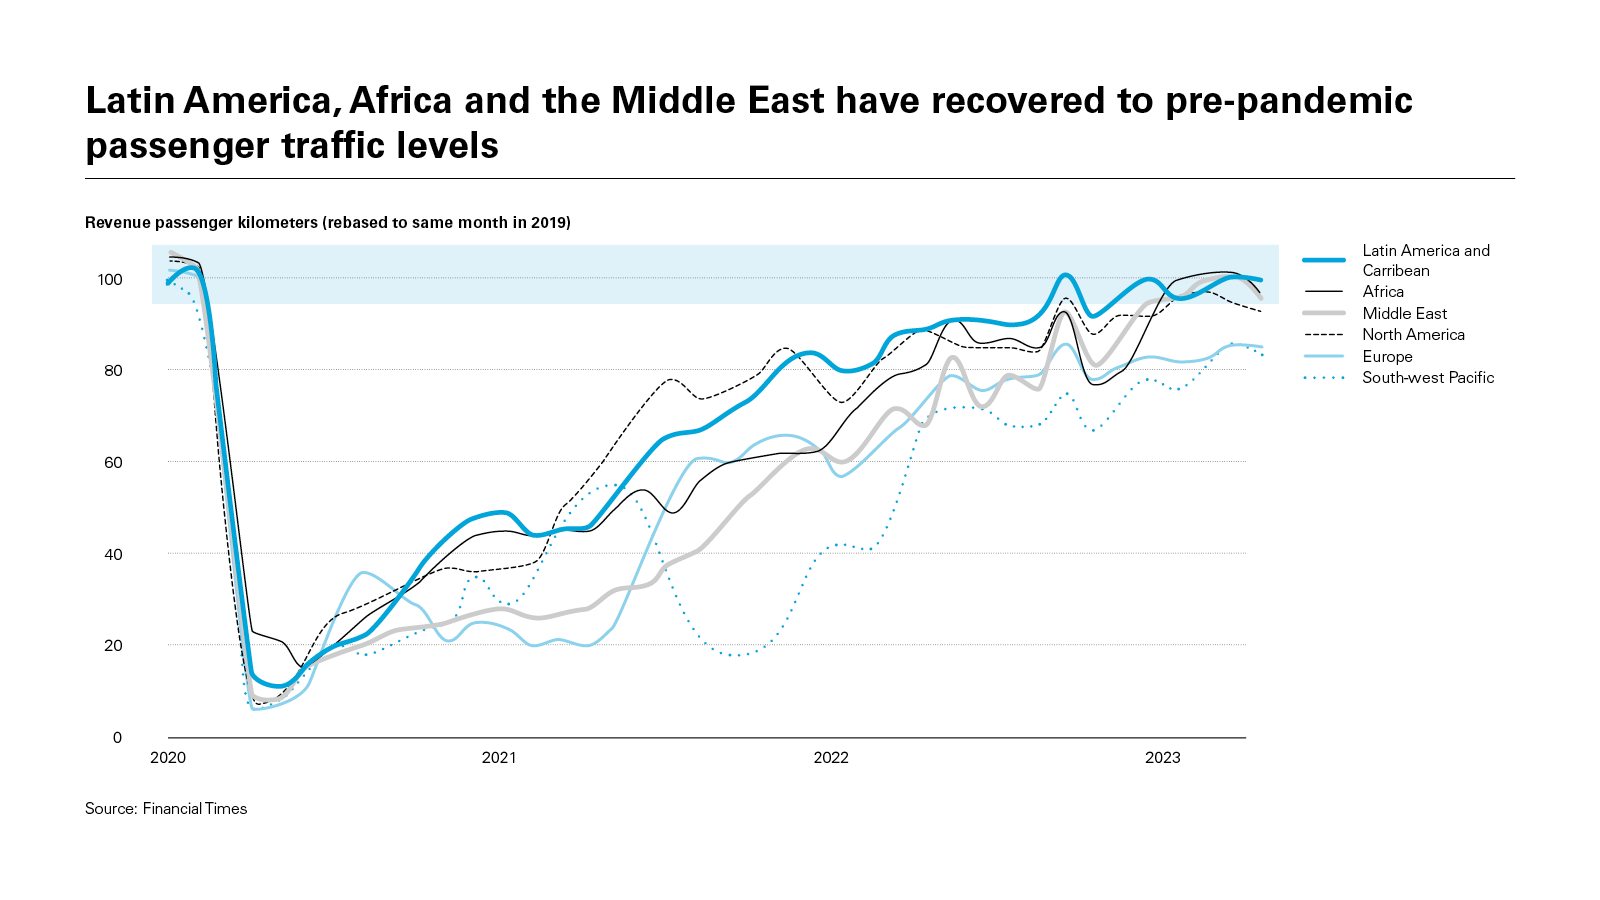 Latin America, Africa and the Middle East have recovered to pre-pandemic passenger traffic levels